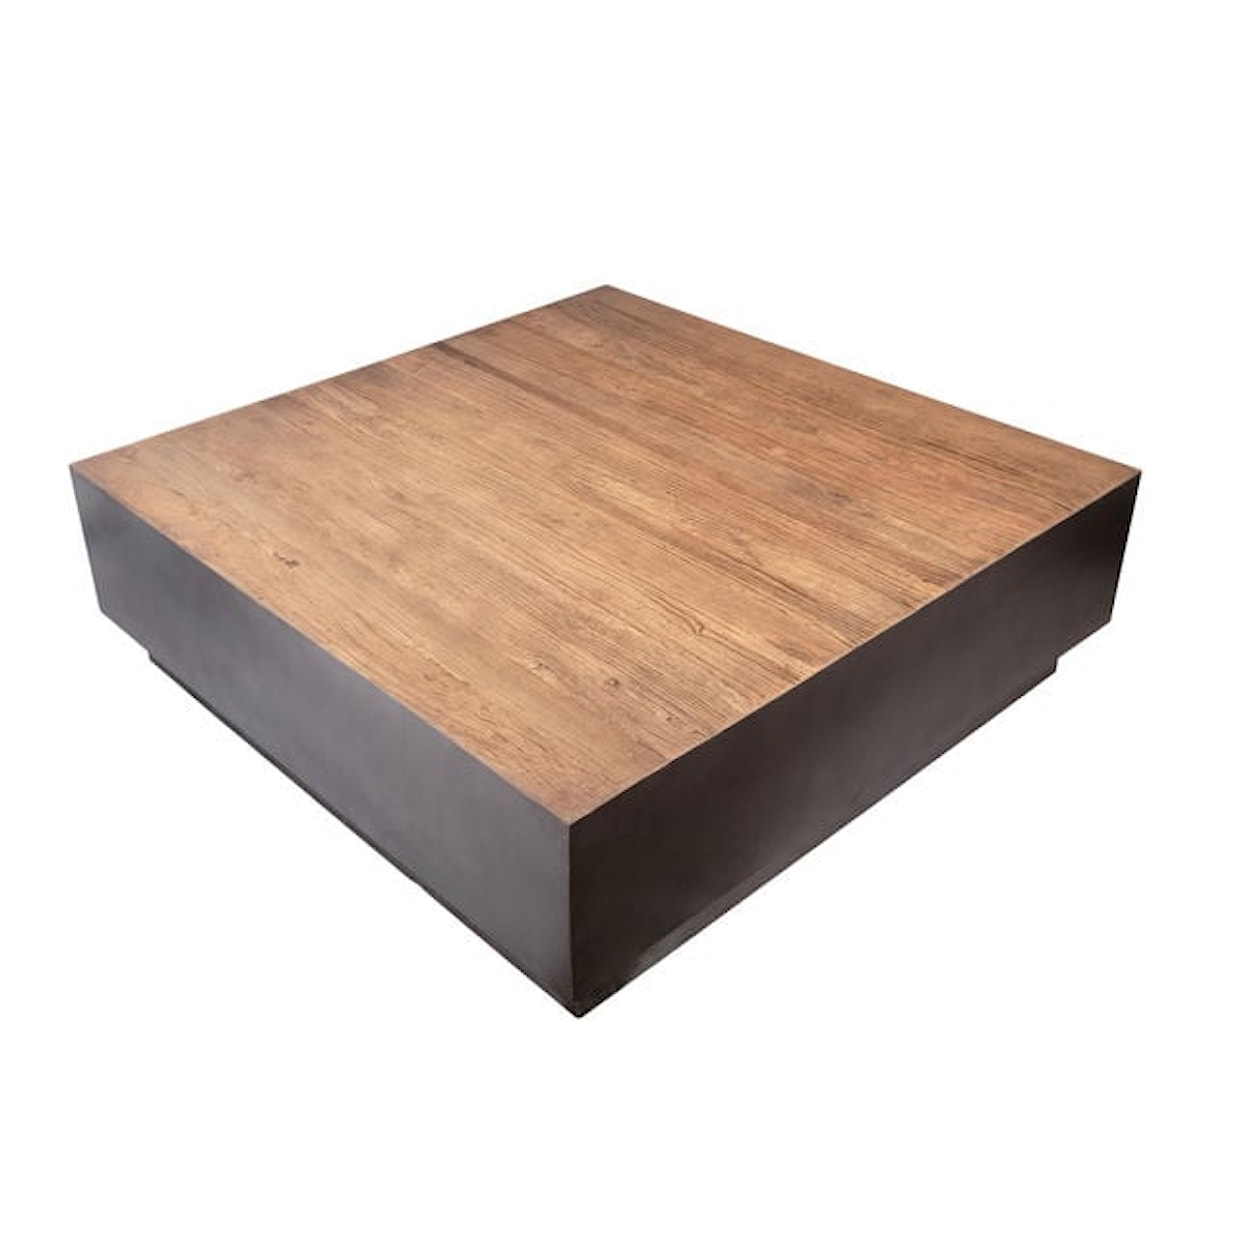 Dovetail Furniture Coffee Tables MATTEO COFFEE TABLE